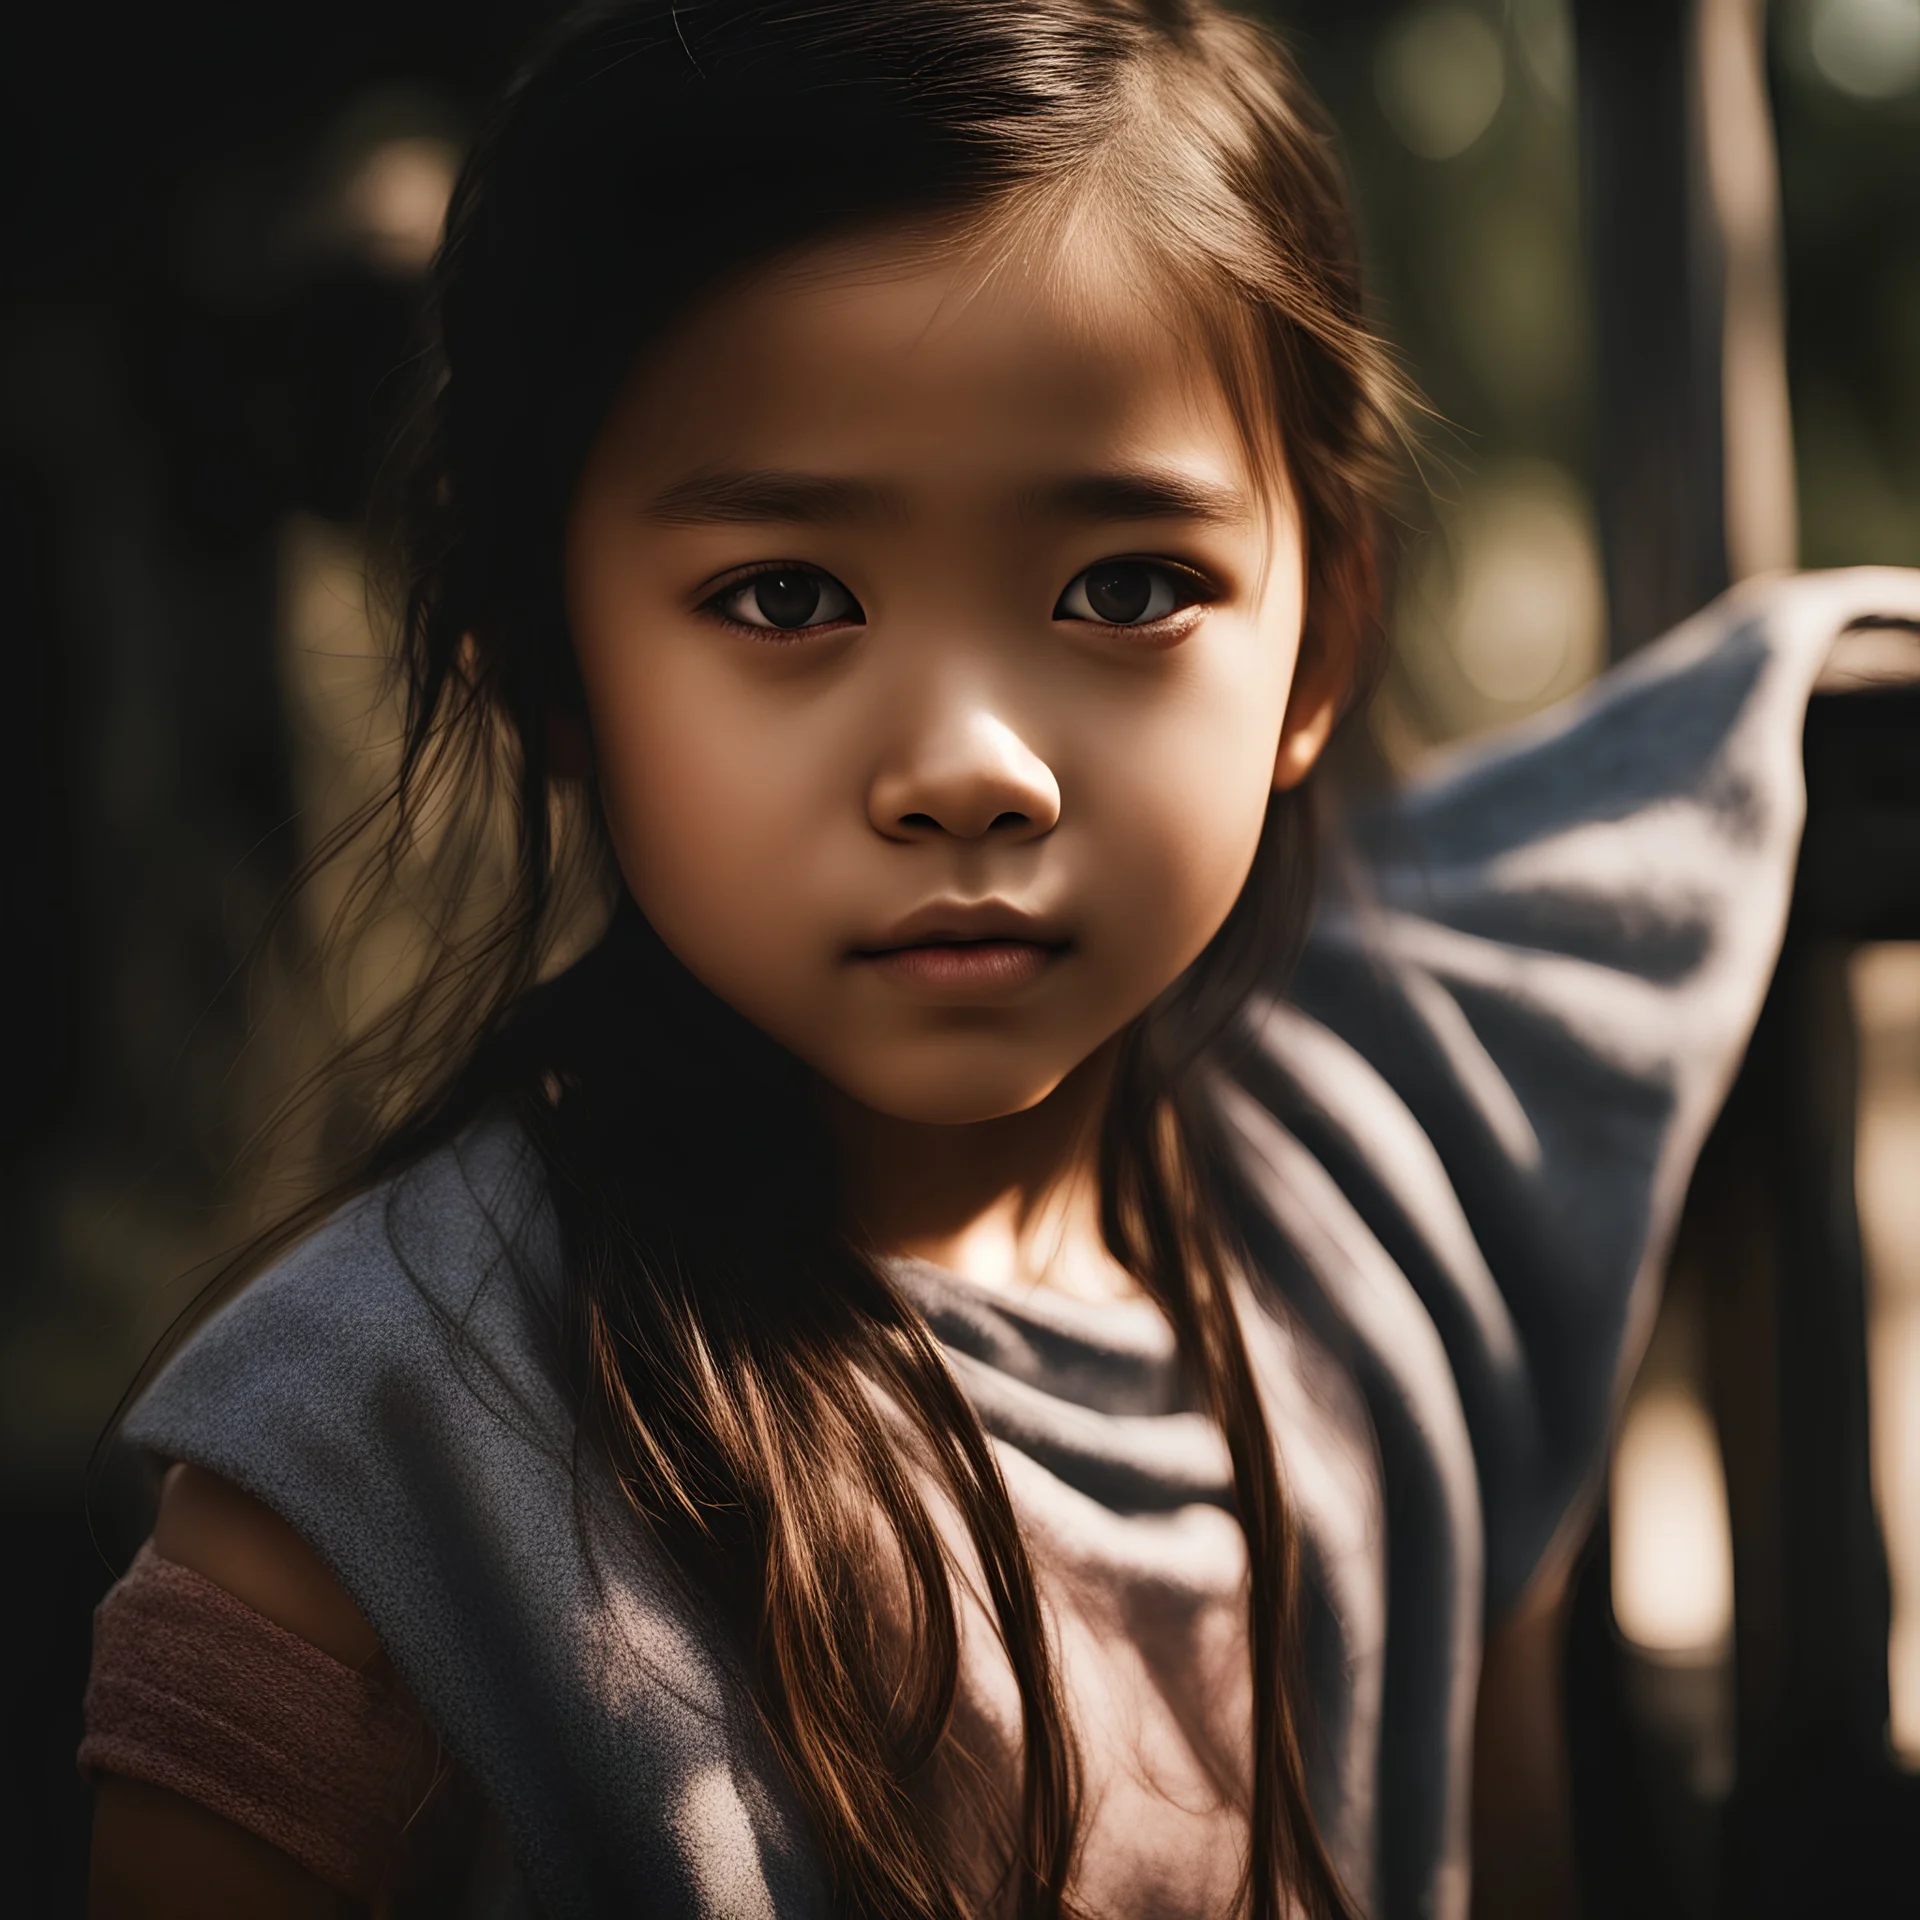 high resolution) (portrait), (little latino Asian girl), (harsh light), (intense shadows), (contrasting tones), (close-up), (cheerfull expression), ((emphasized features)), striking eyes, (unique angle), (bold composition), (intense mood), ((contoured features)), (strong personality), (realistic skin texture), (professional photography), (edgy fashion), (creative makeup), ((intense gaze)), (fierce beauty), (sharp details), ((fashion model)), ((high cheekbones)), (dark brown eyes)